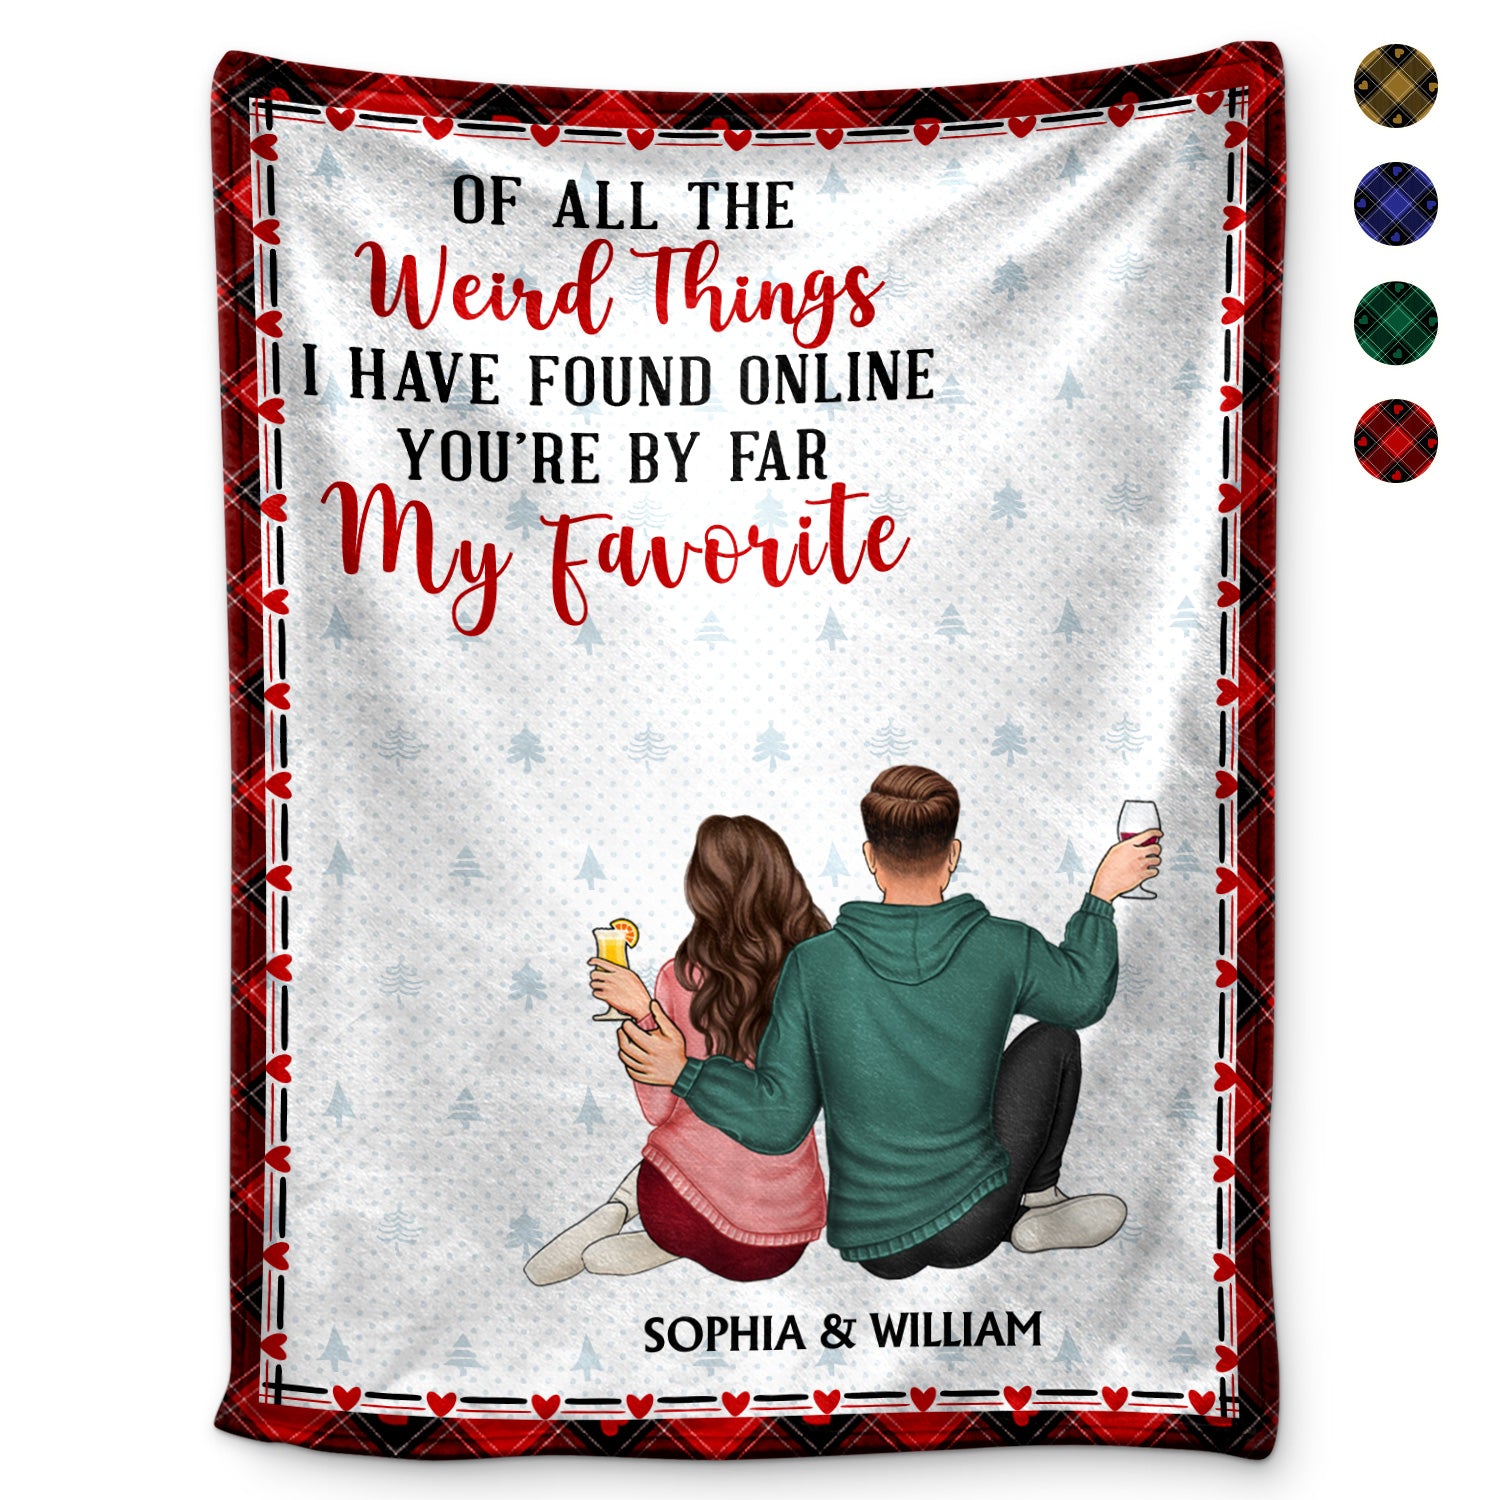 Of All The Weird Things - Anniversary, Loving Gift For Couples, Husband, Wife - Personalized Fleece Blanket